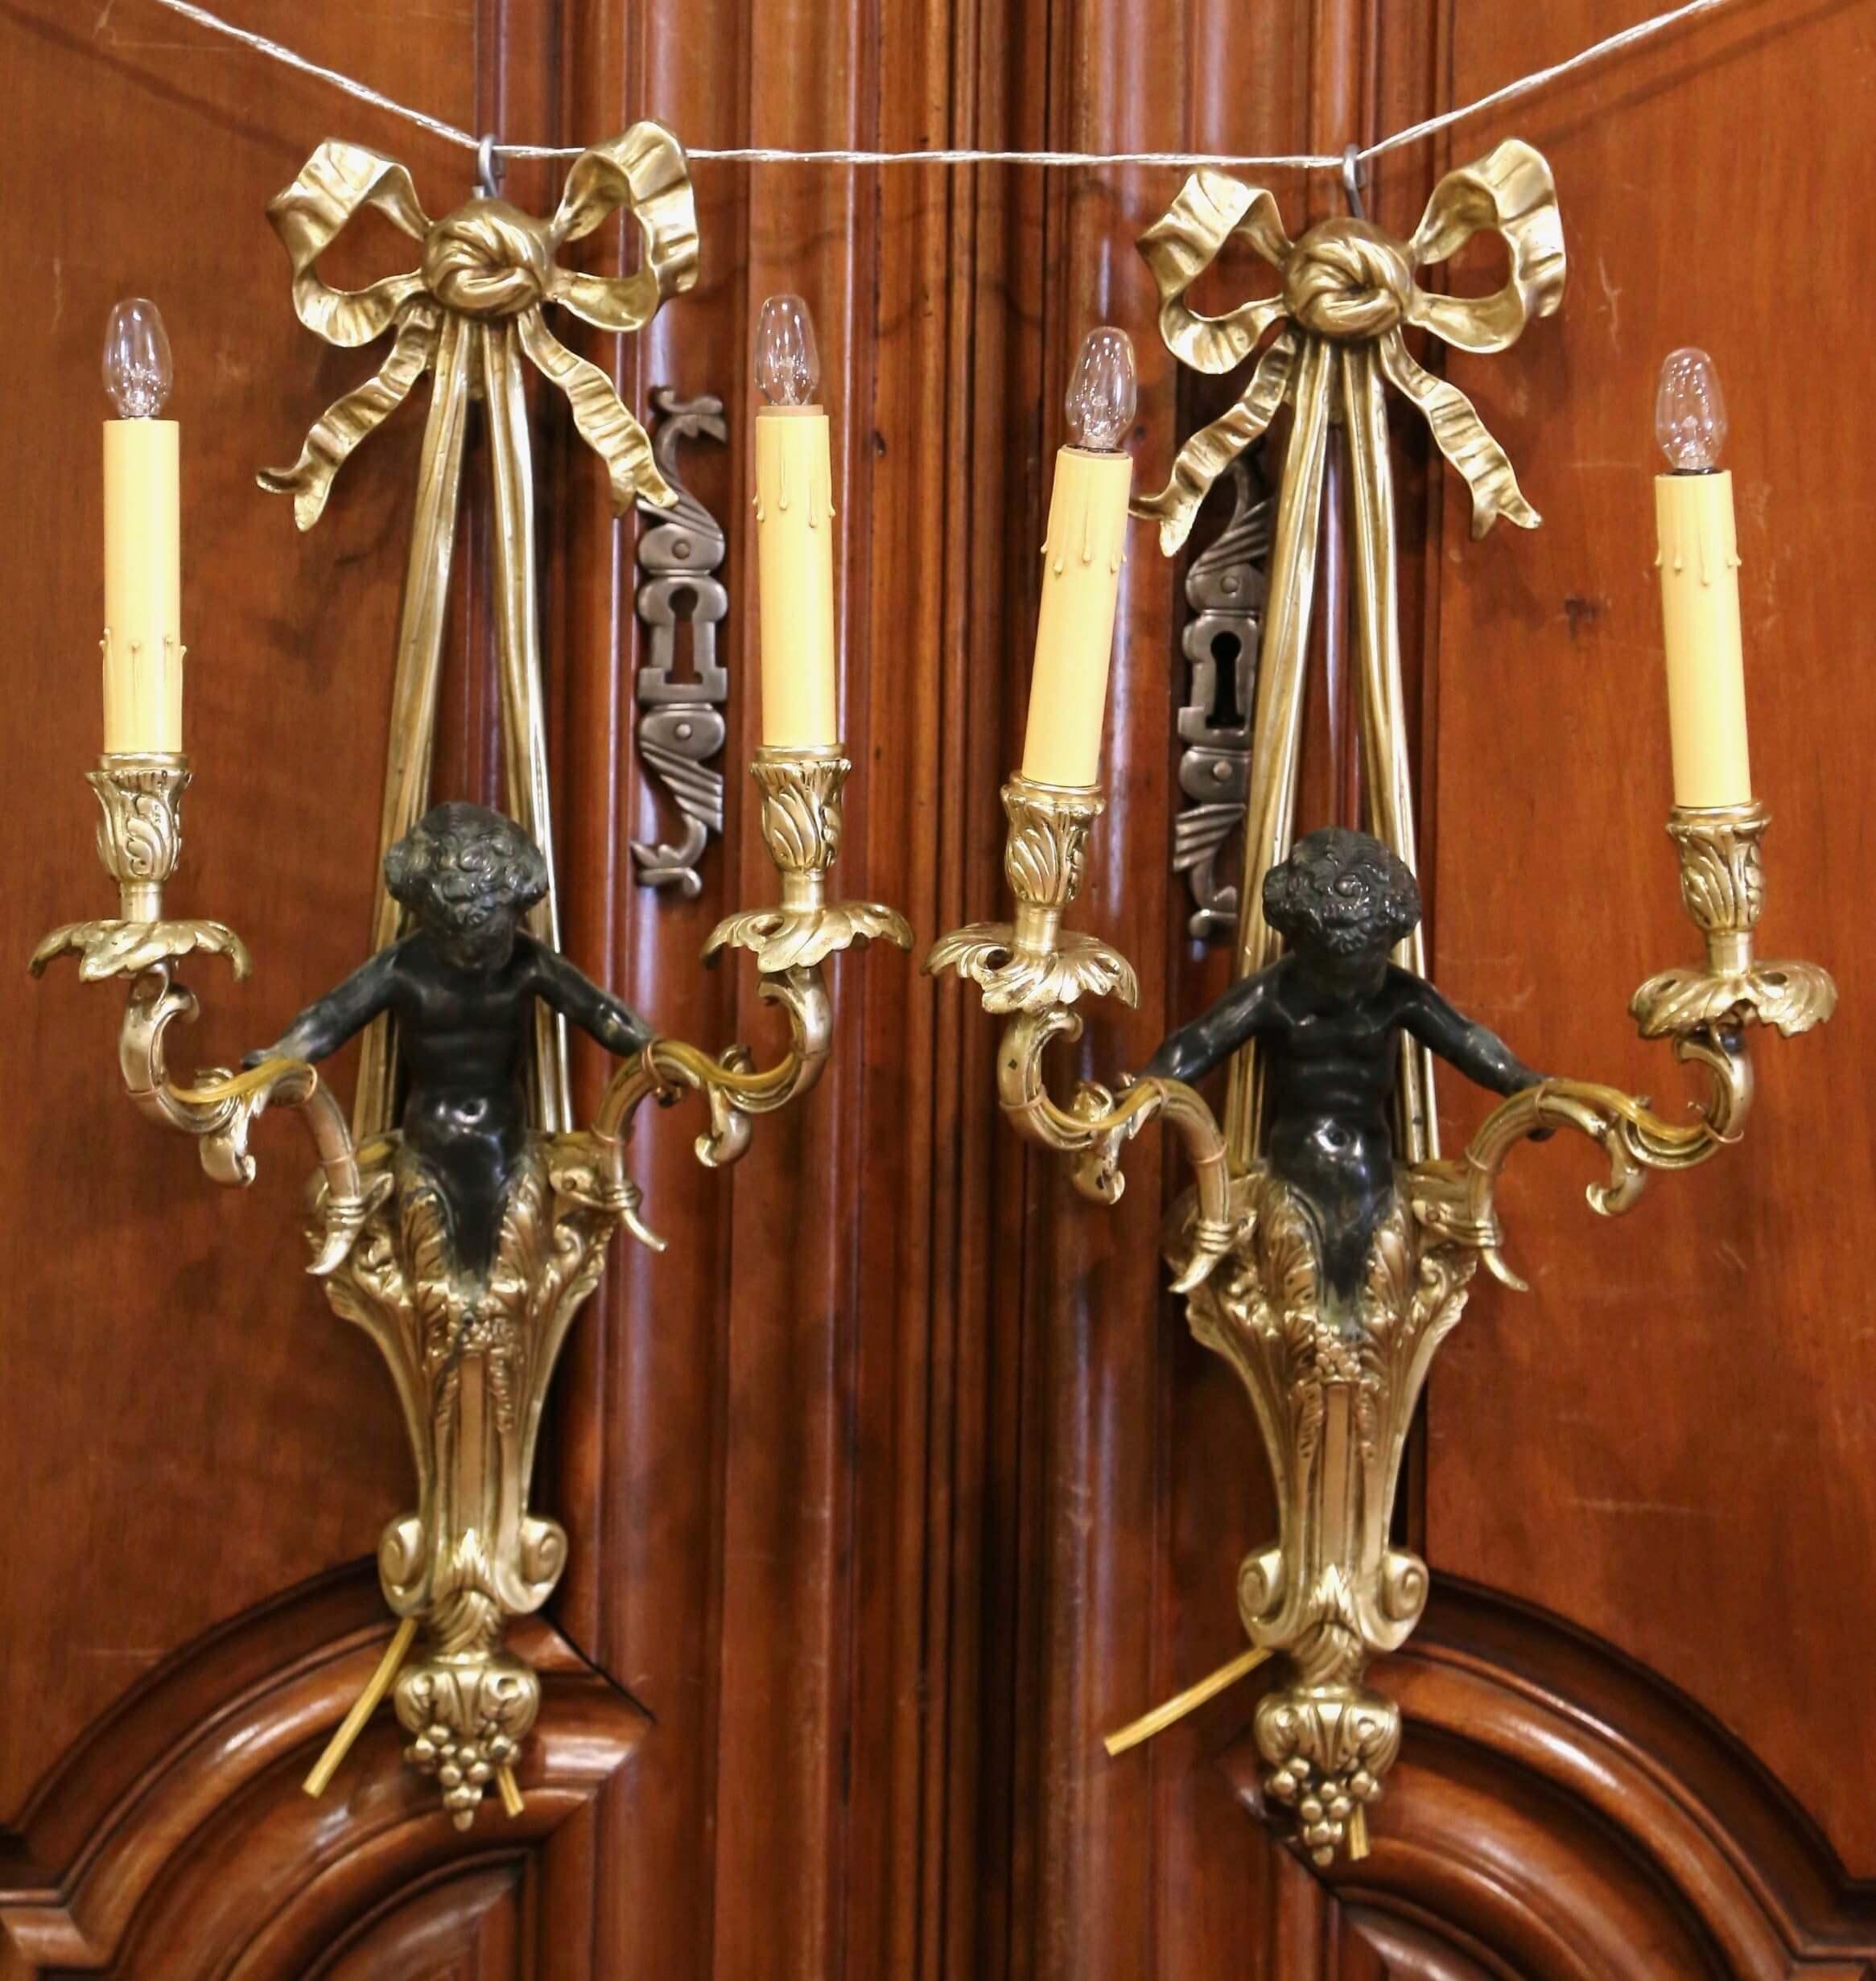 Pair of Mid-19th Century French Louis XVI Bronze Dore Wall Sconces with Cherubs 1